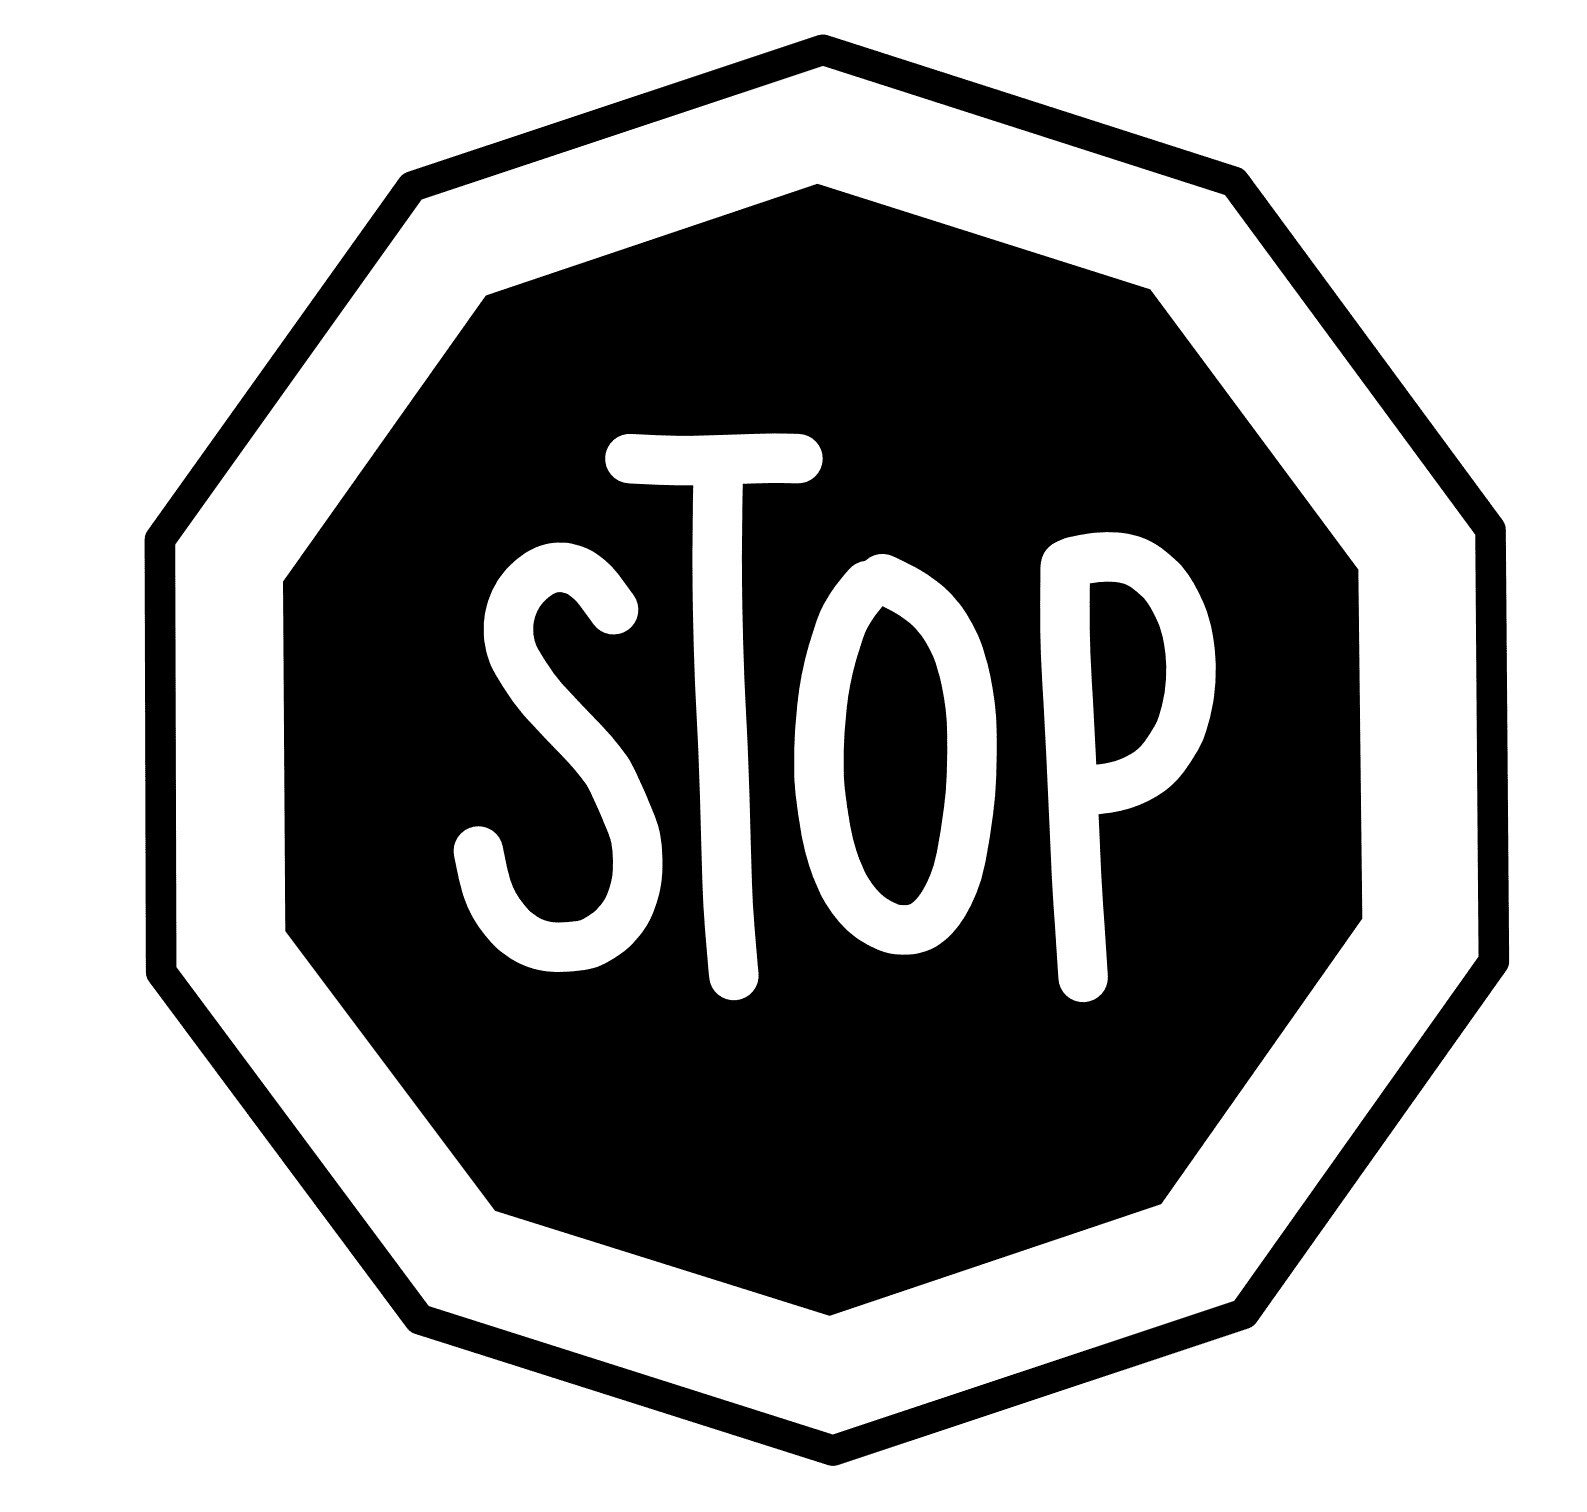 Stop signal oa commons clipart free